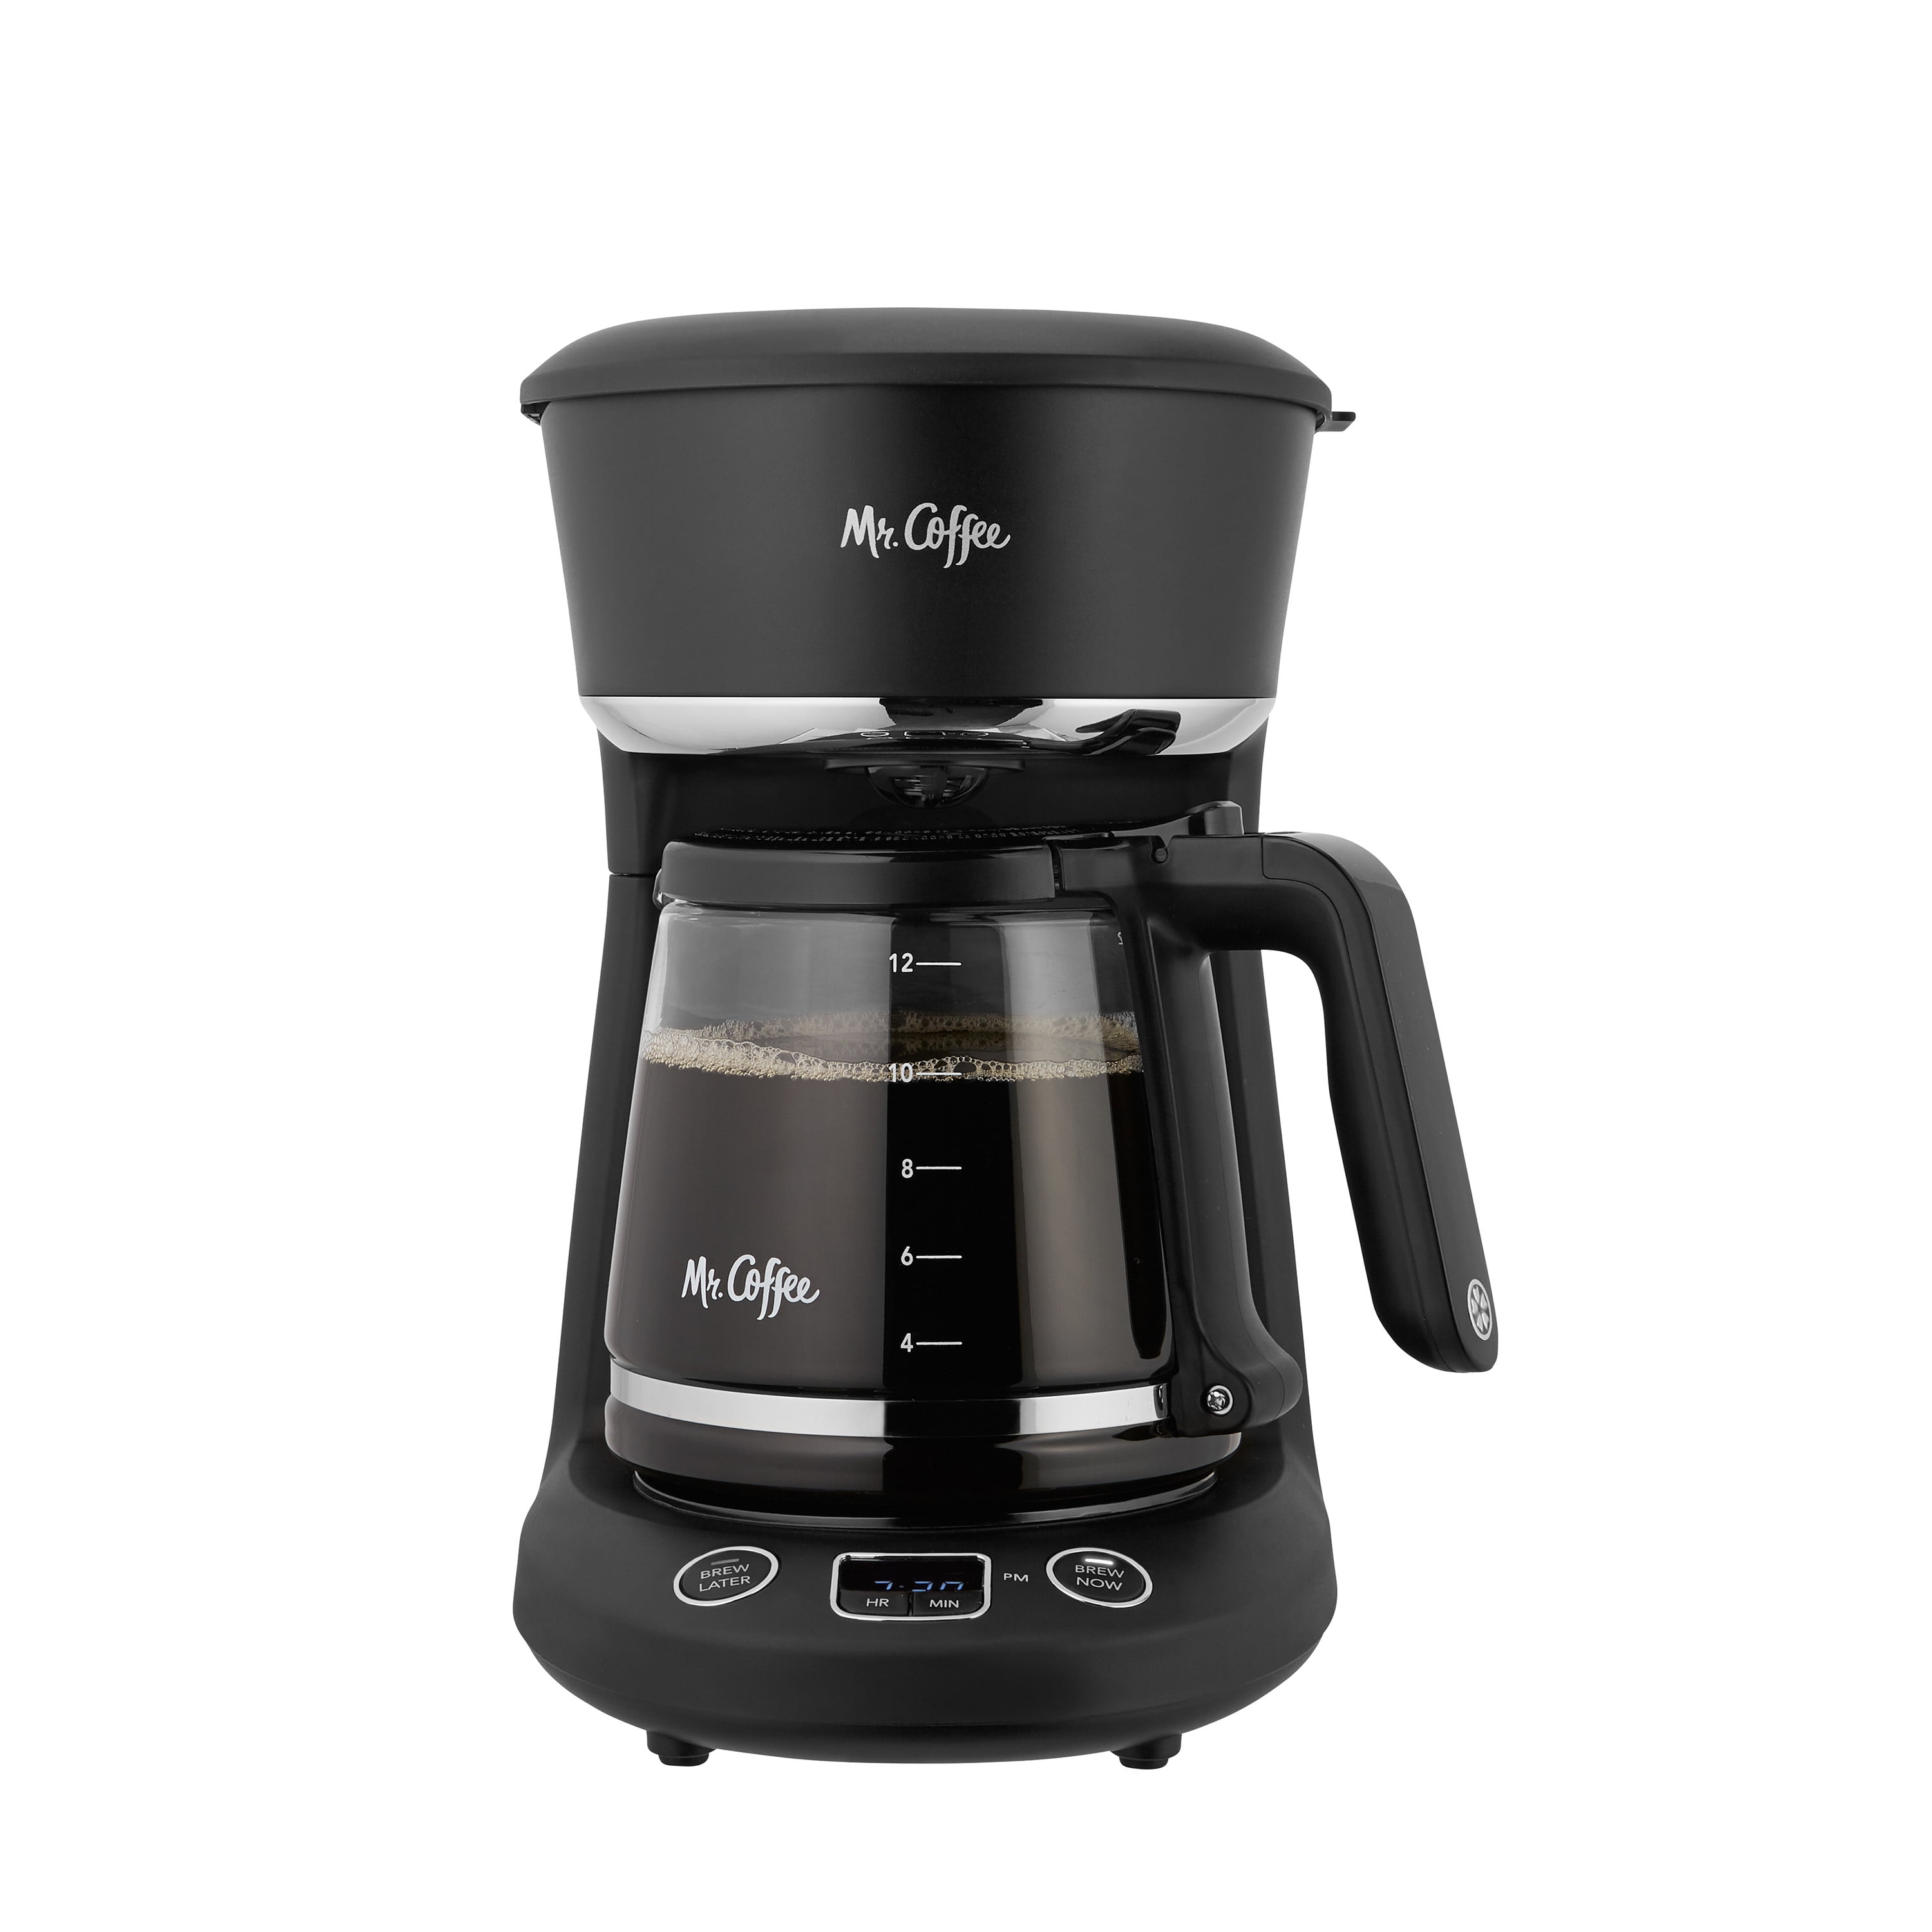 Mr. Coffee® Programmable 12-Cup Coffee Maker - Black, 1 ct - Food 4 Less